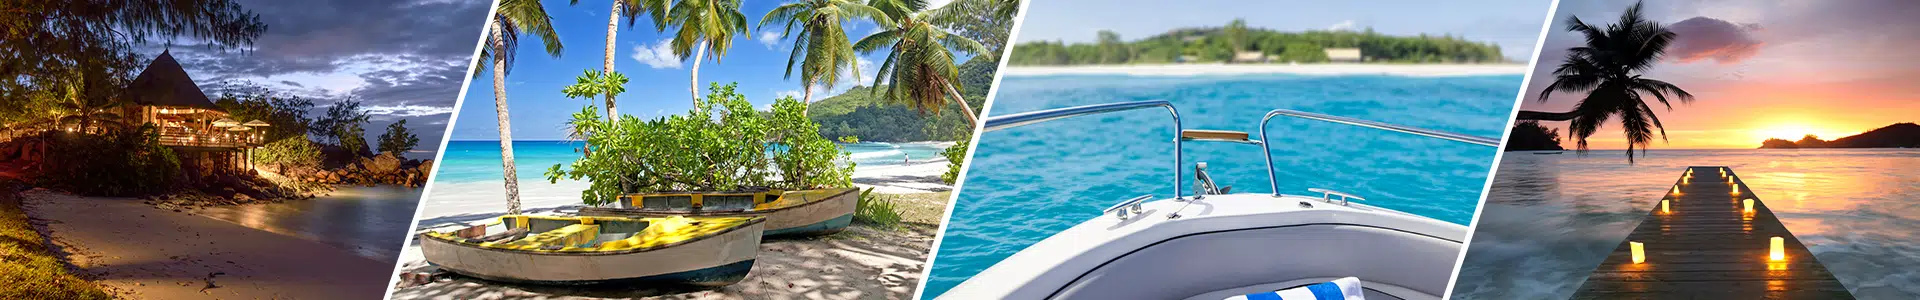 Seychelles Luxury Tour Packages